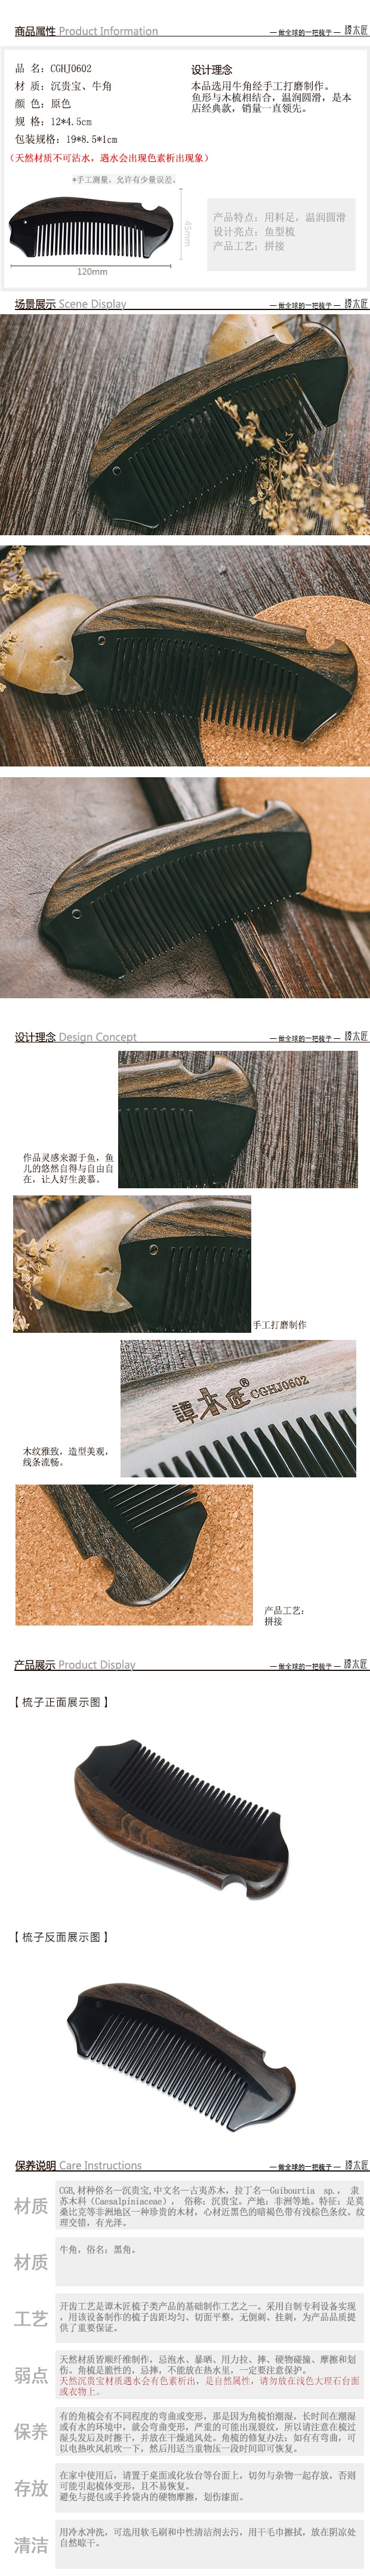 TAN MUJIANG Horn Comb Natural Handmade Massage Comb Anti Static Detangling Comb for Thick Curly and Wavy Hair 1 piece